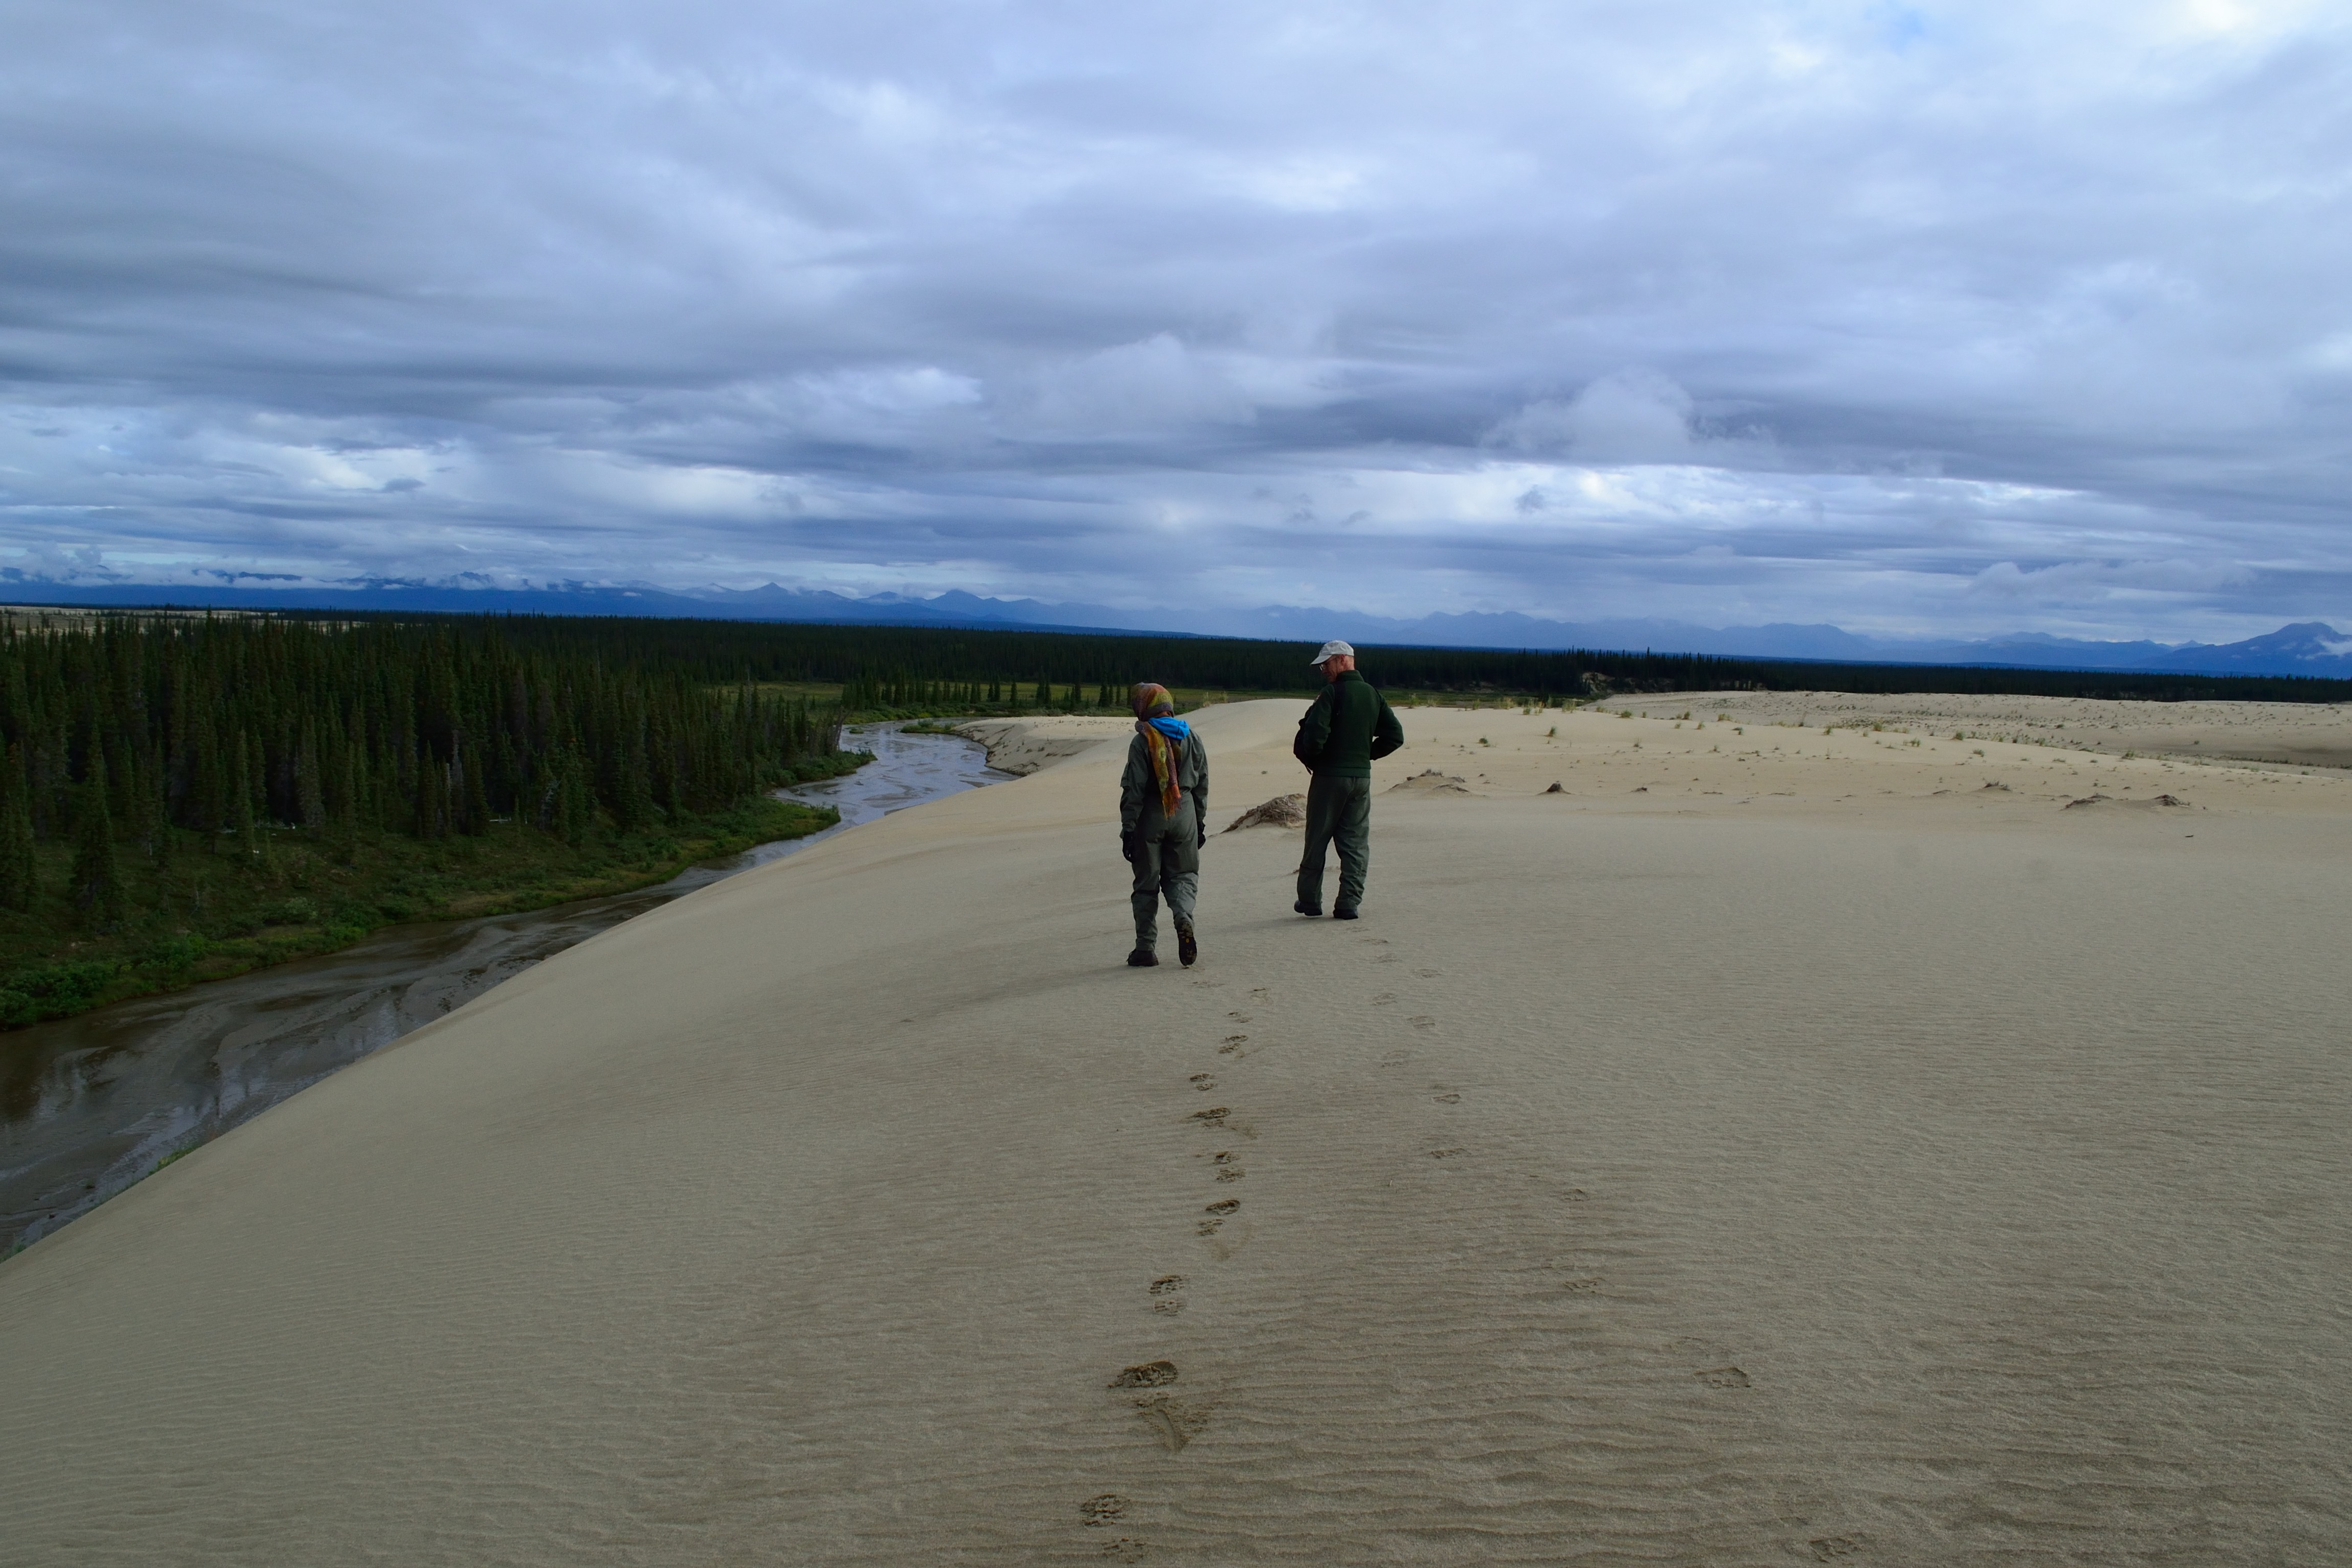 NPS Ranger, Thea, and an NPS Pilot, Rick, hike along a dune in the Great Kobuk Sand Dunes while wearing their Nomex flight suits. Photo by NPS/Rachel Post.